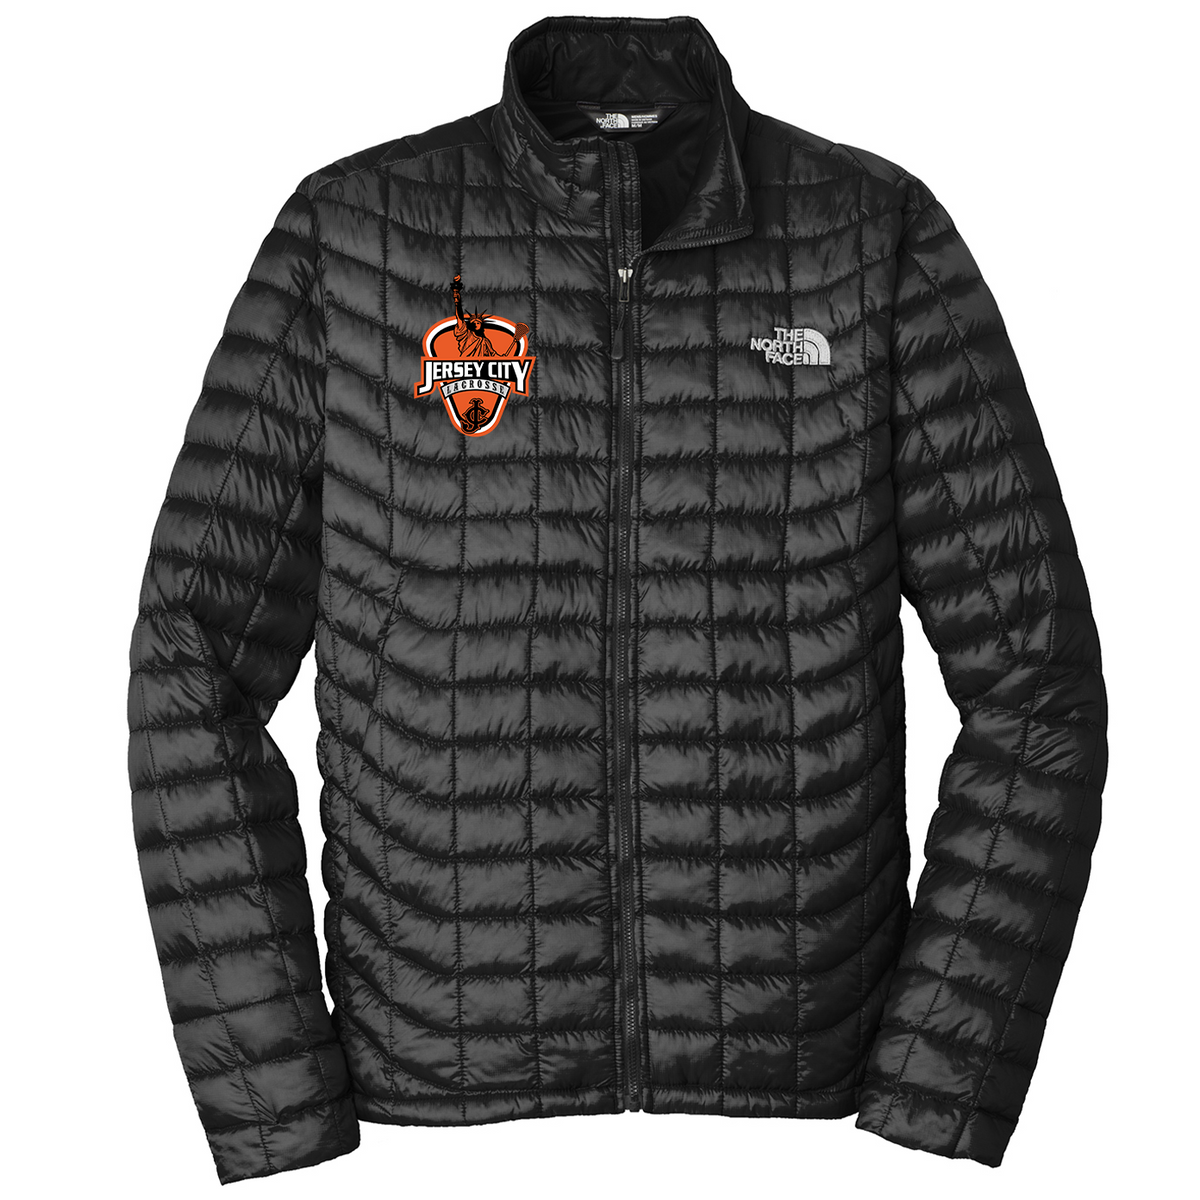 Jersey City Lacrosse The North Face ThermoBall Jacket